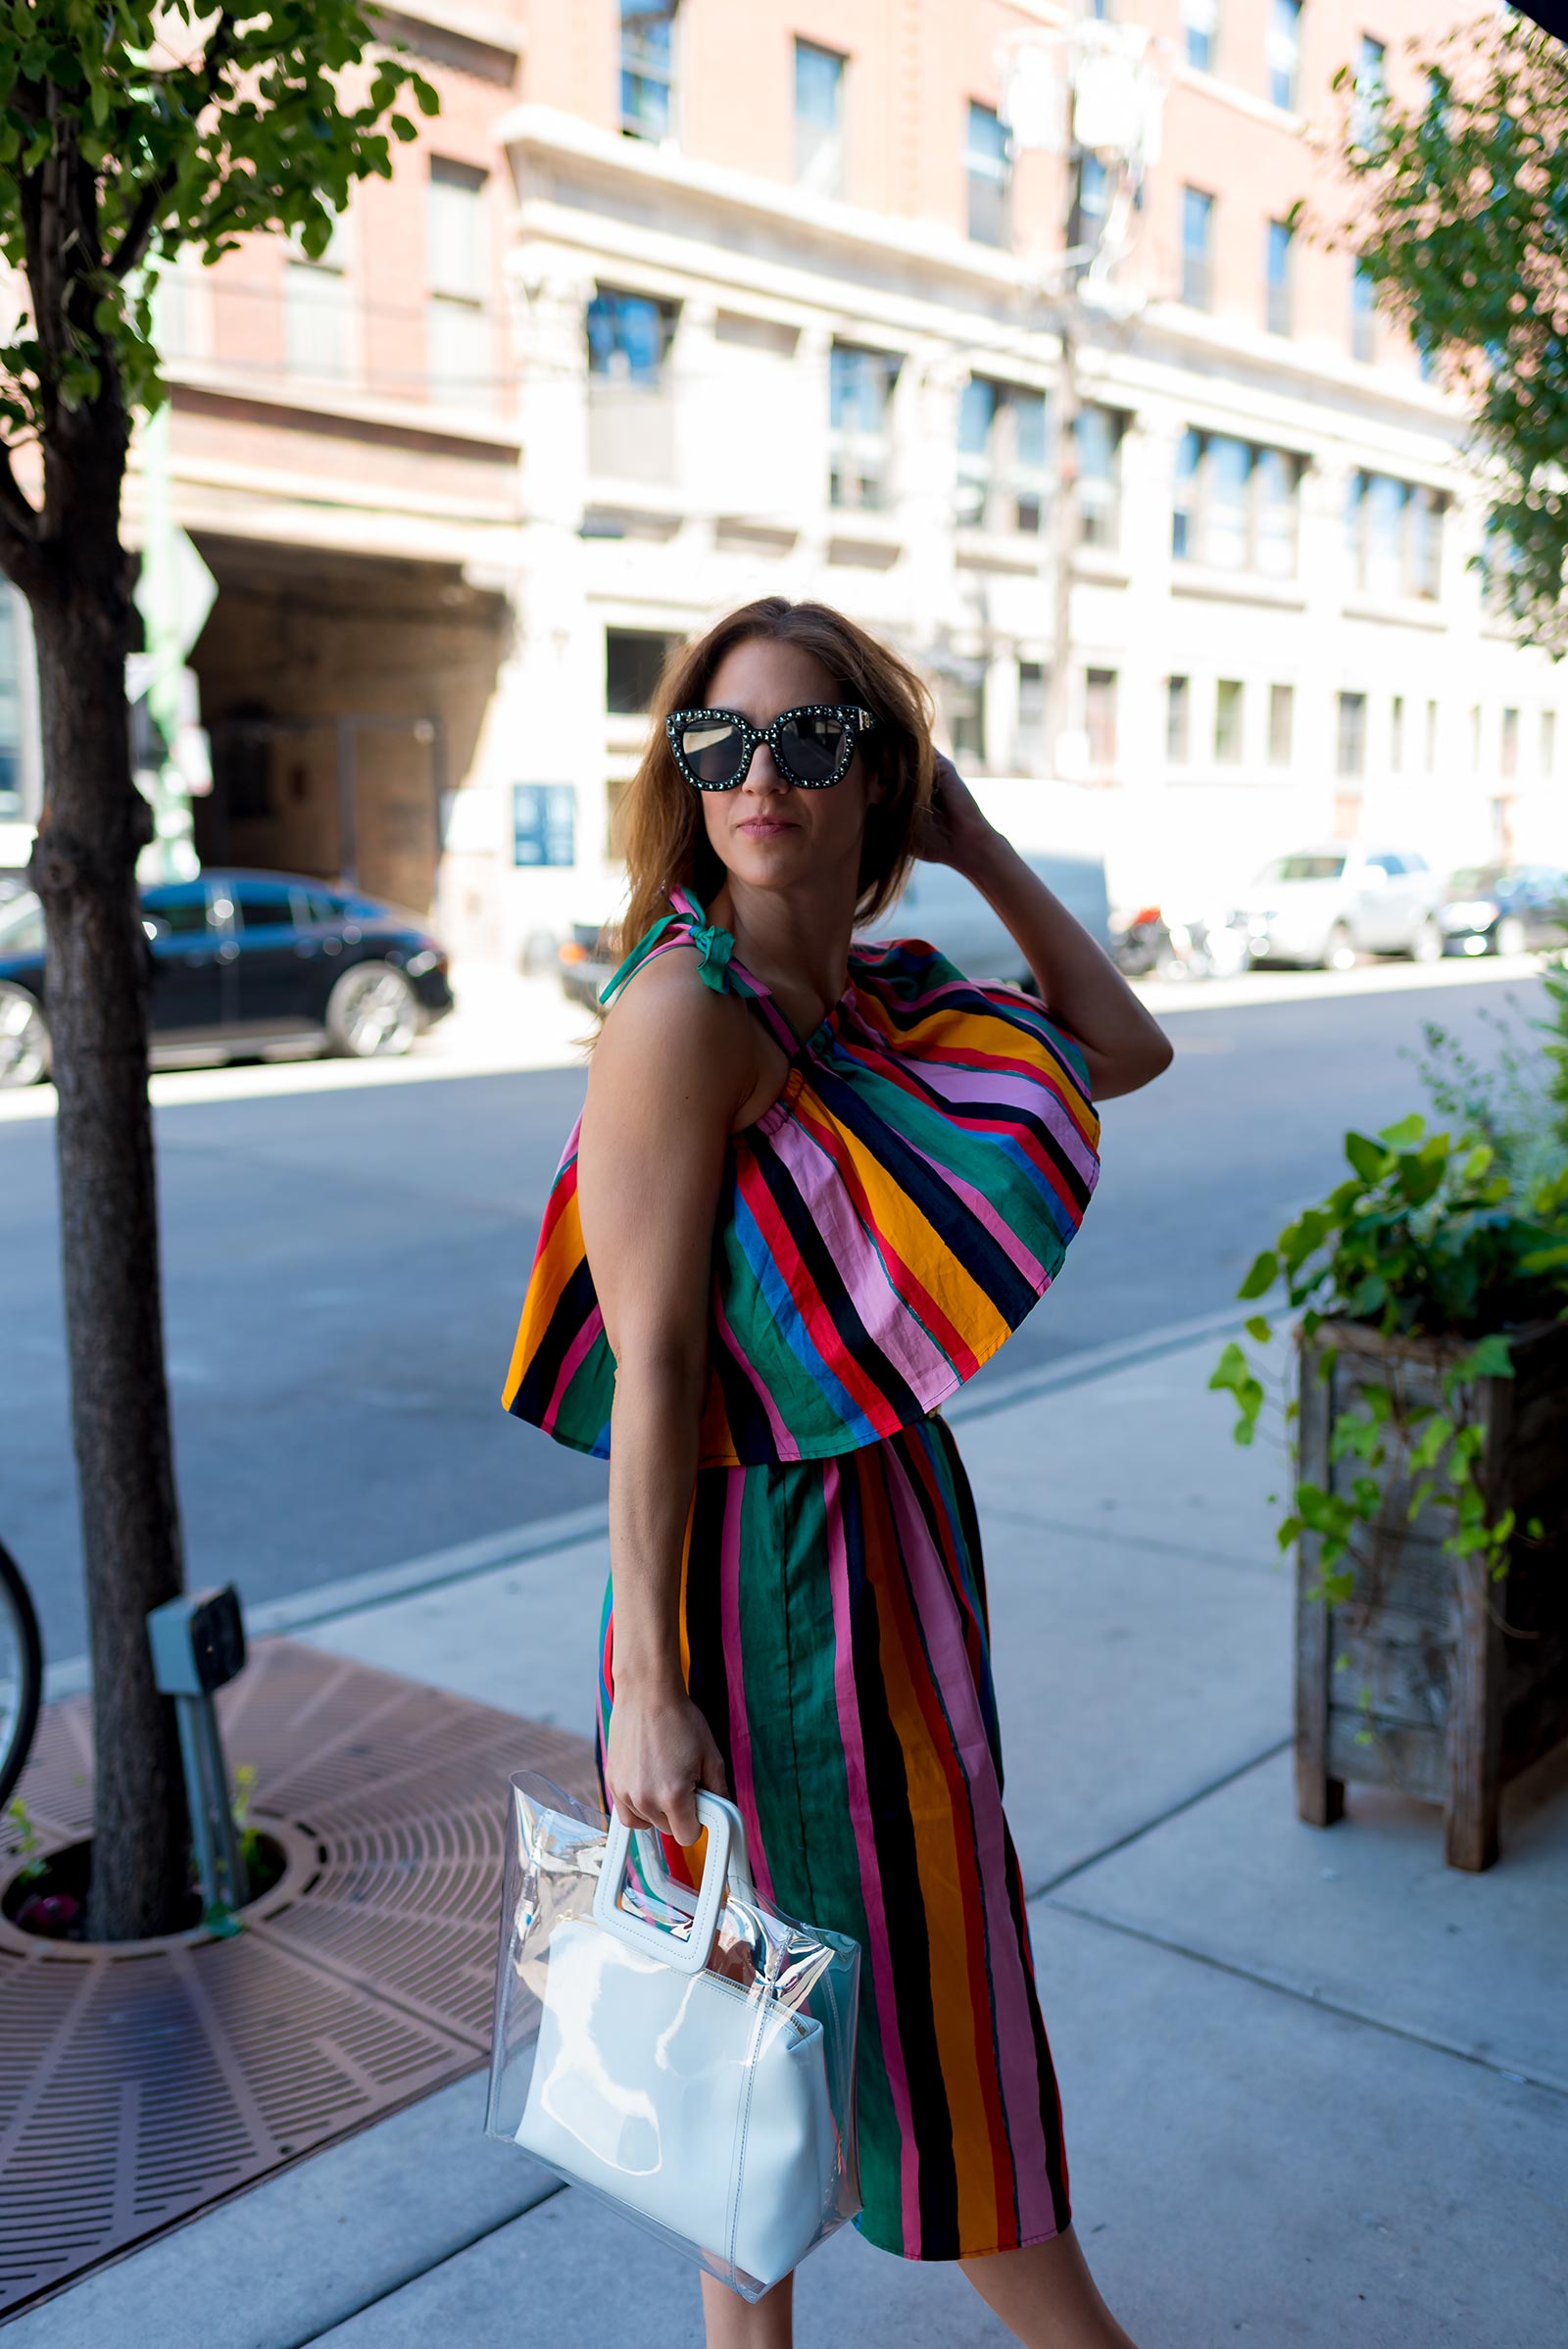 Anna Roufos Sosa of Noir Friday wearing a Who What Wear dress and Staud bag.